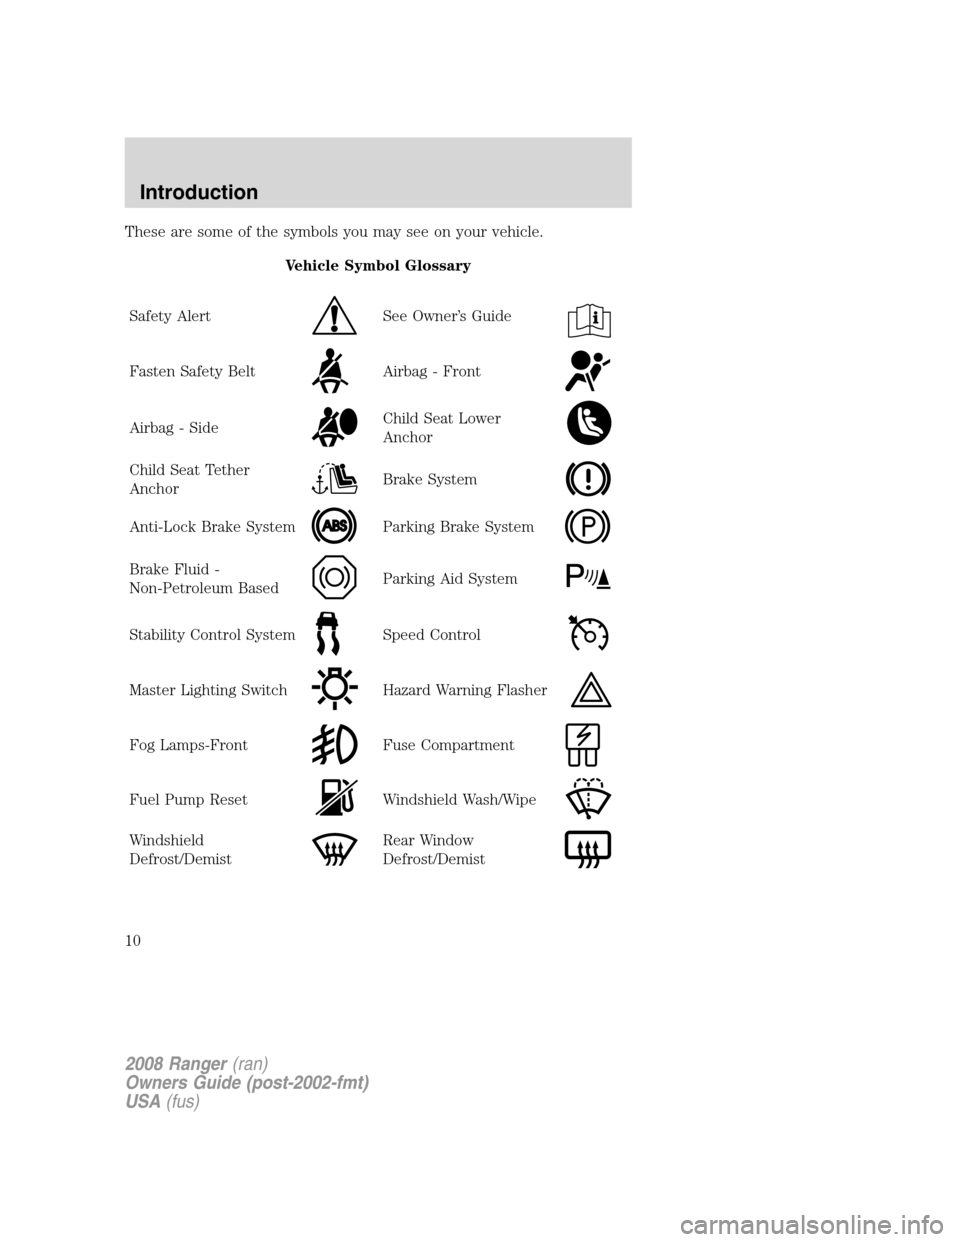 FORD RANGER 2008 2.G Owners Manual These are some of the symbols you may see on your vehicle.
Vehicle Symbol Glossary
Safety Alert
See Owner’s Guide
Fasten Safety BeltAirbag - Front
Airbag - SideChild Seat Lower
Anchor
Child Seat Tet